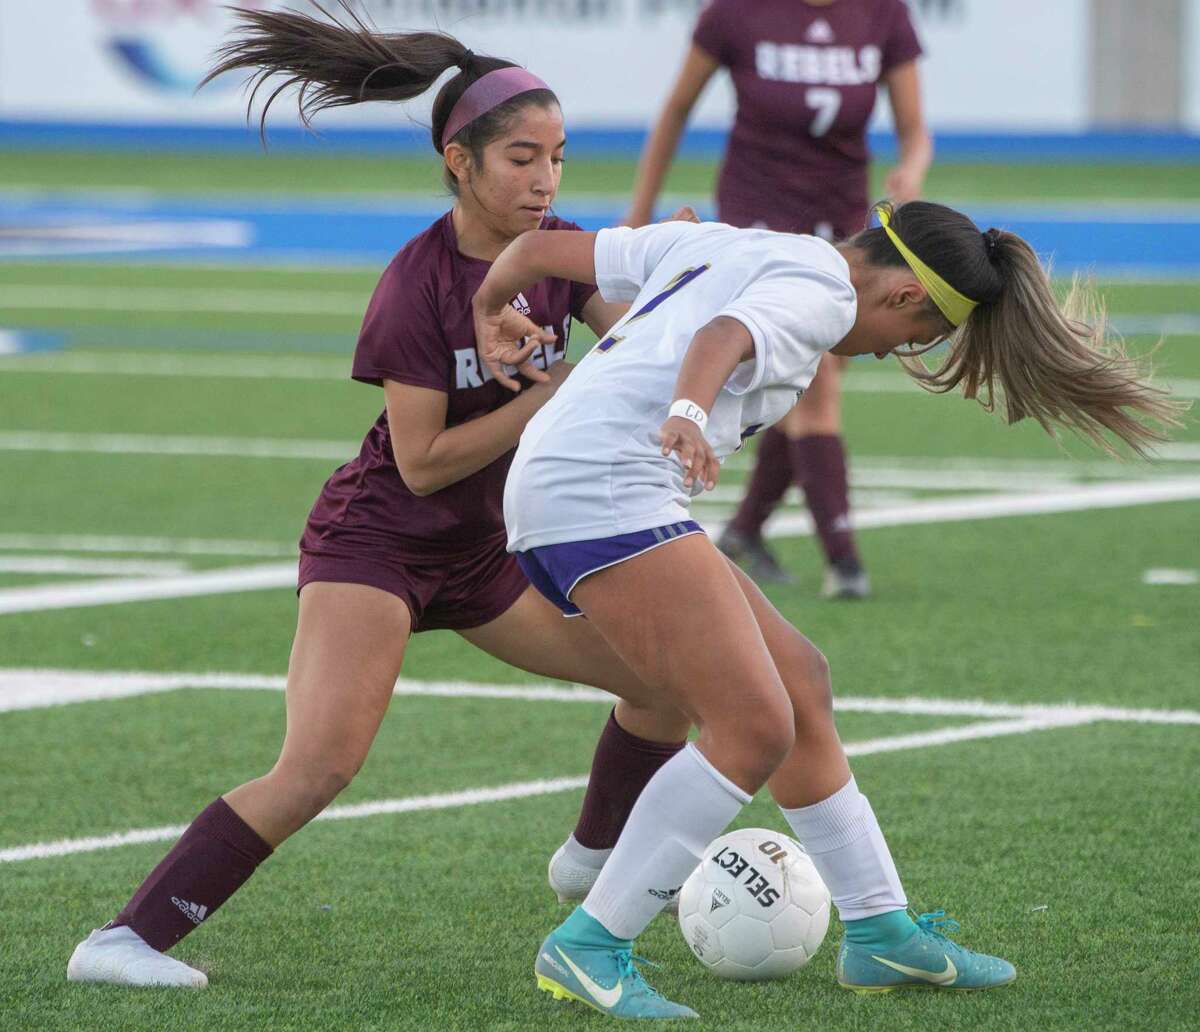 Midland High's Anahy Grimaldo battles for control of the ball with Legacy High's Alyssa Ortega 02/08/2022 at Grande Communications Stadium. Tim Fischer/Reporter-Telegram